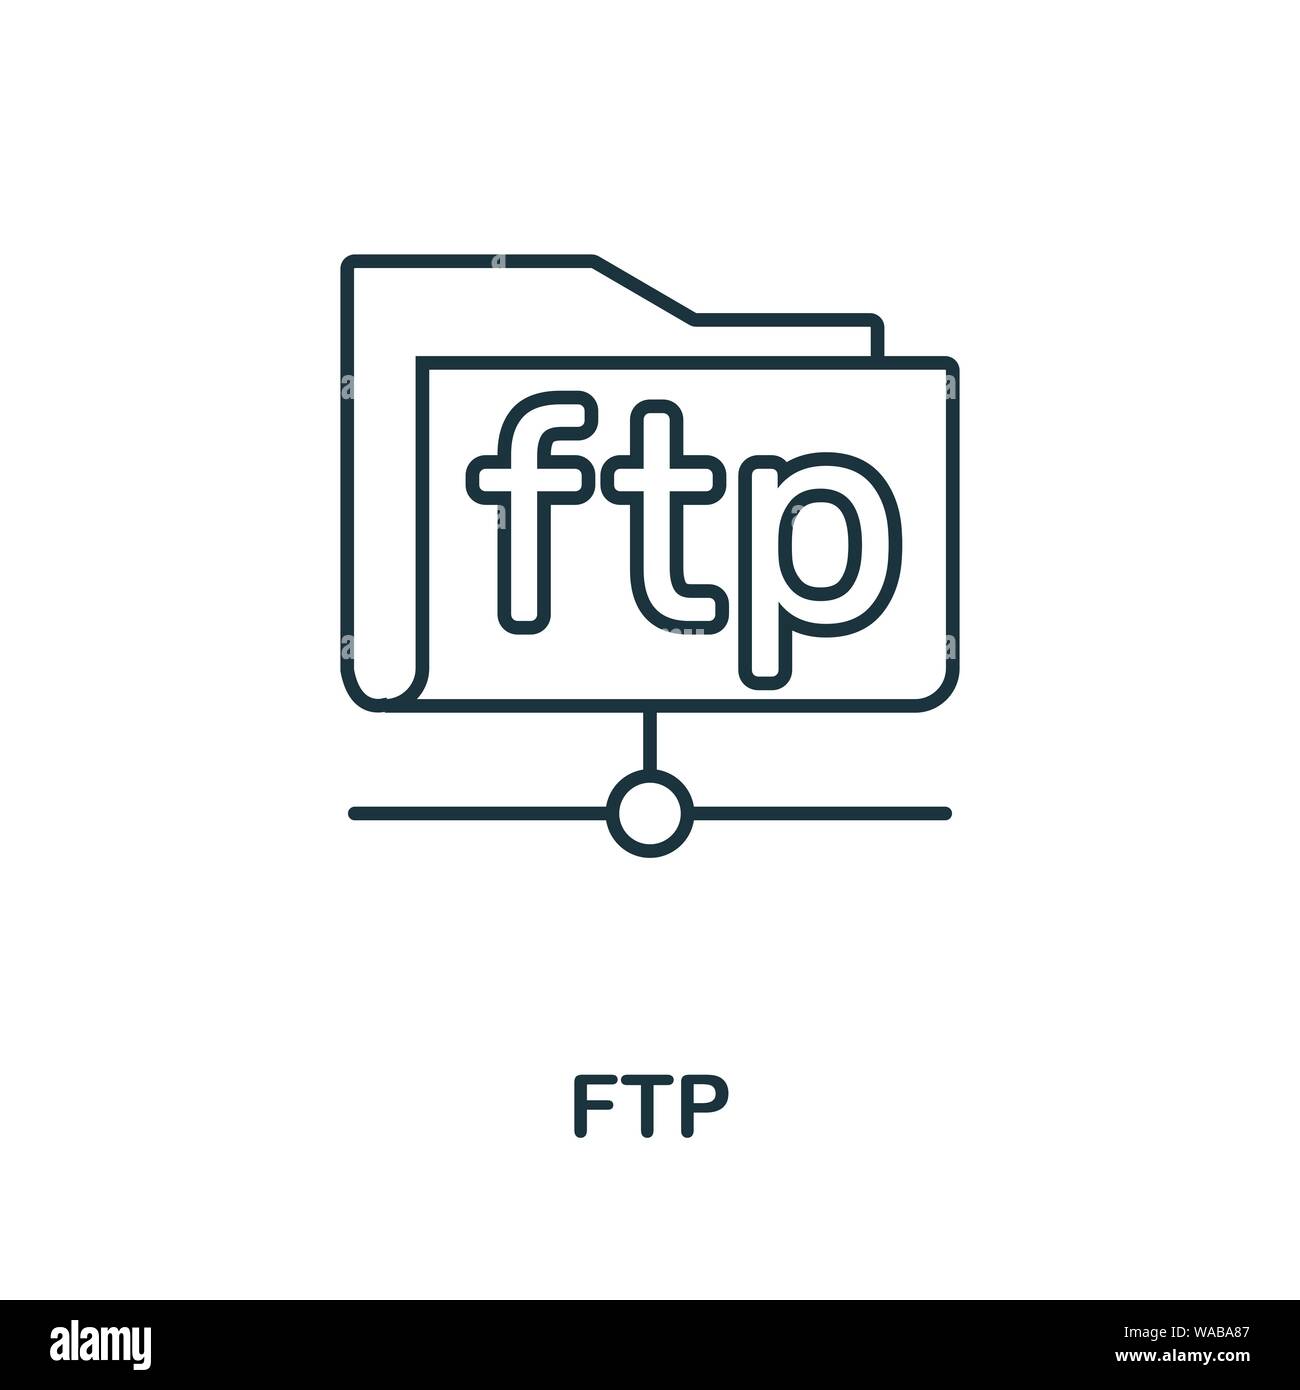 File transfer protocol ftp illustration Stock Vector Images - Alamy